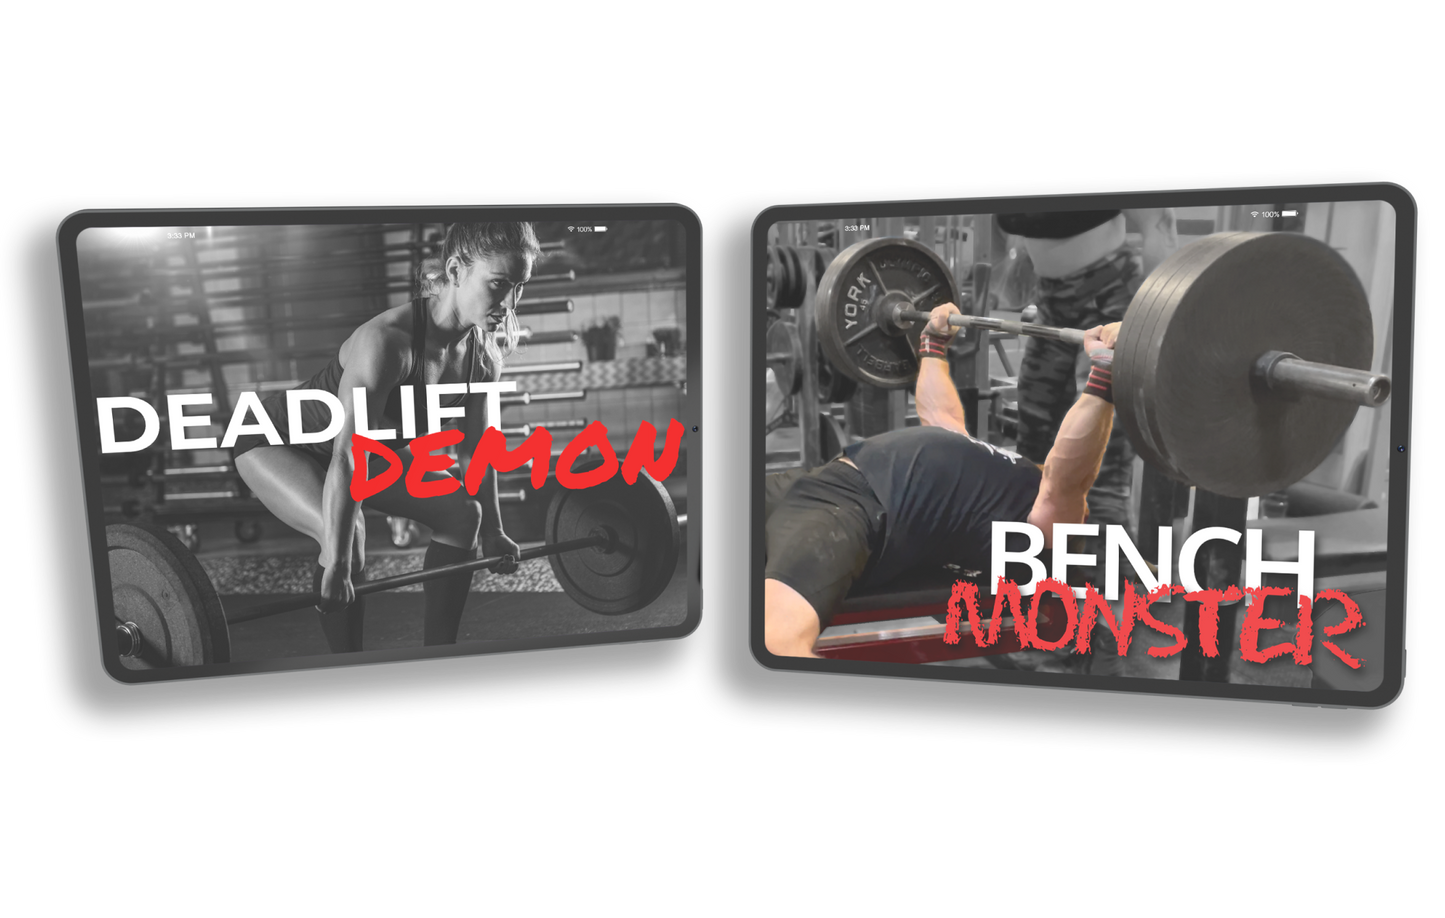 Deadlift Demon and Bench Monster covers on tablets